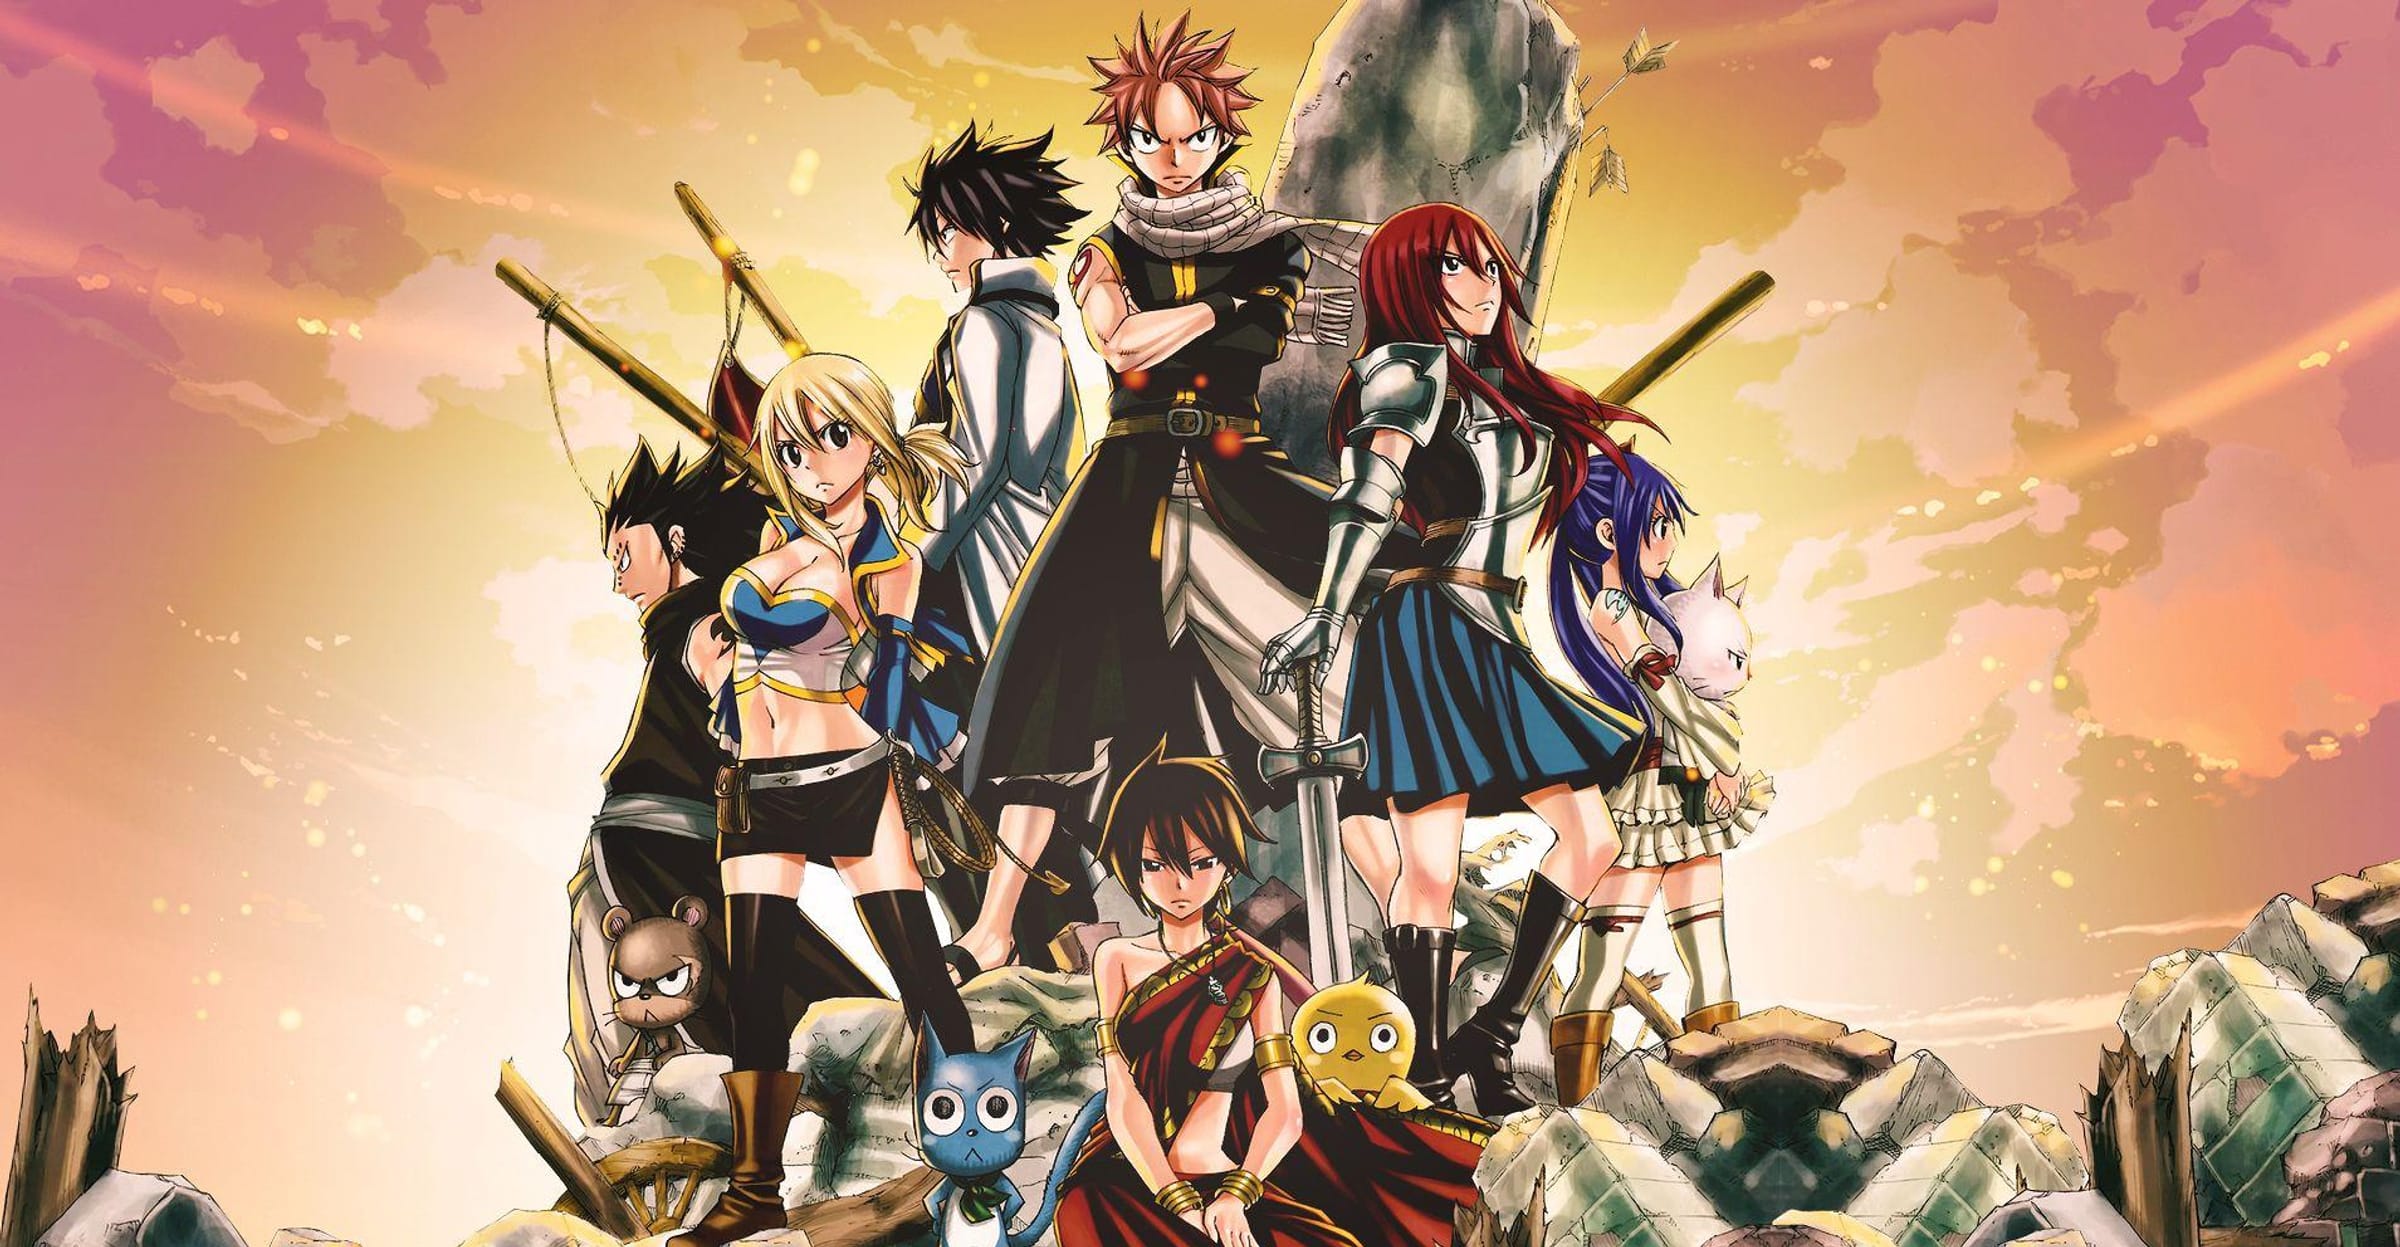 FAIRY TAIL CHARACTER SONG ALBUM